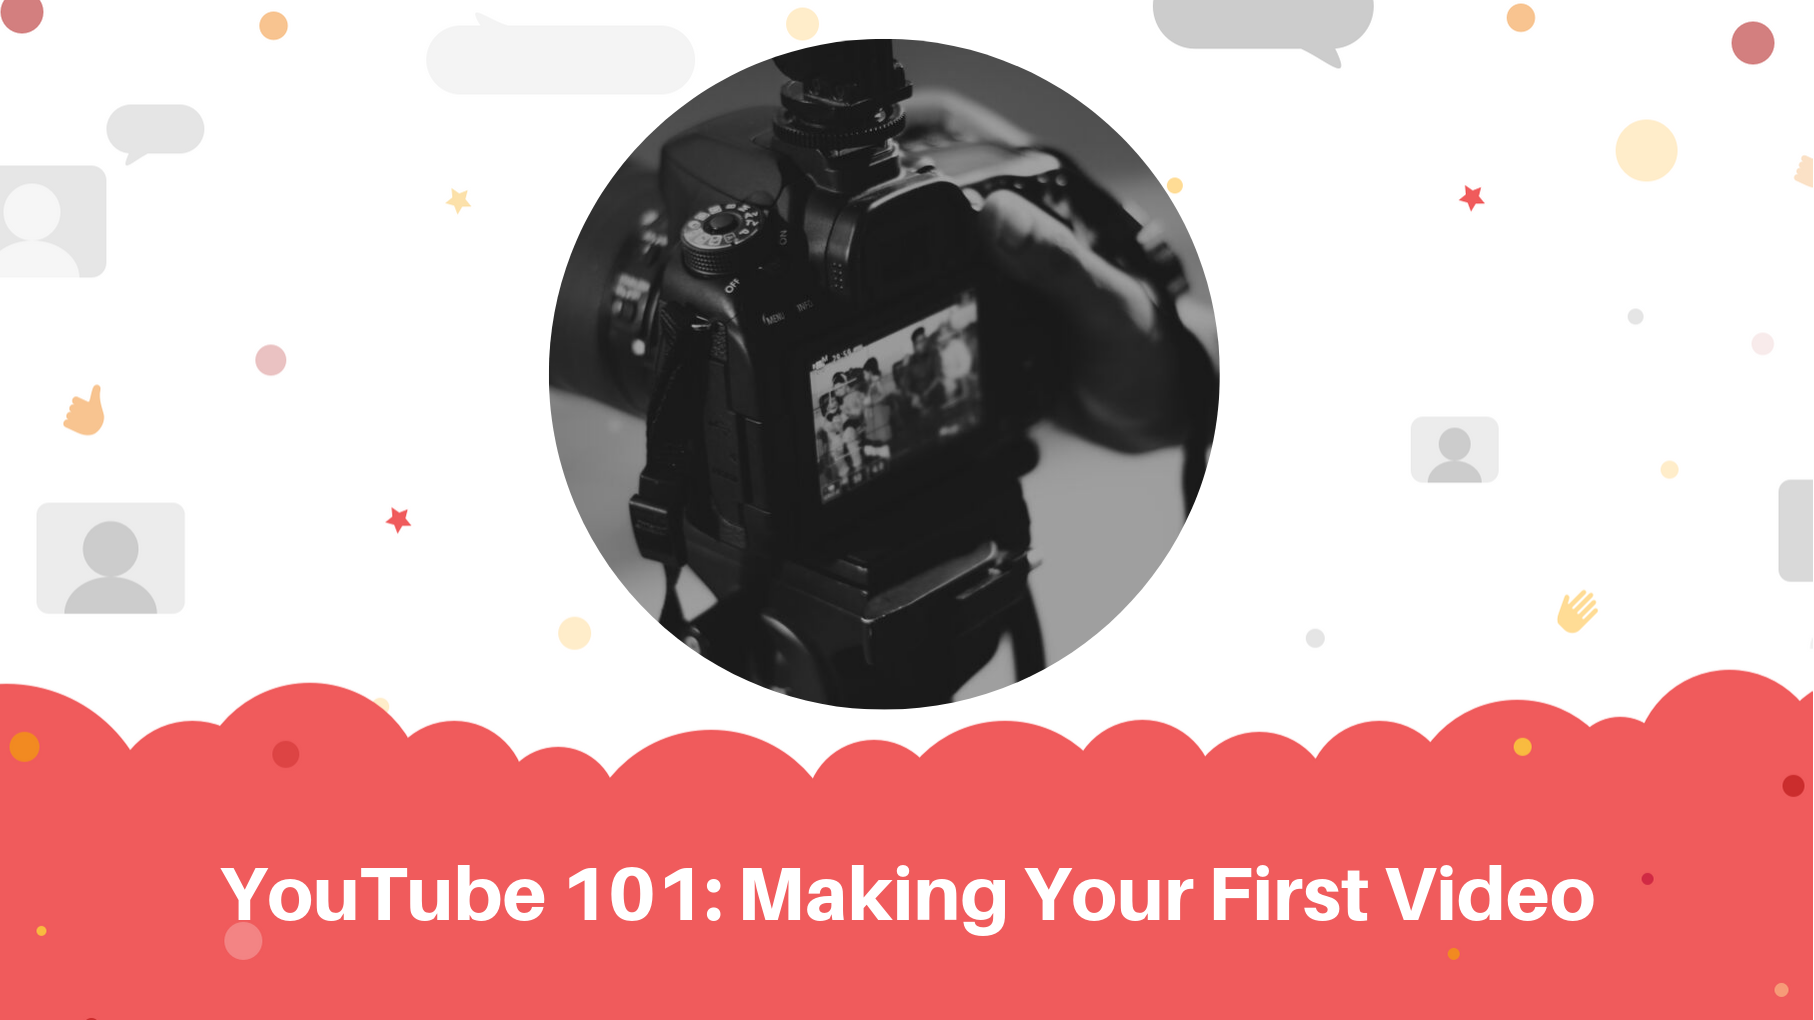 How to Make Your YouTube Video